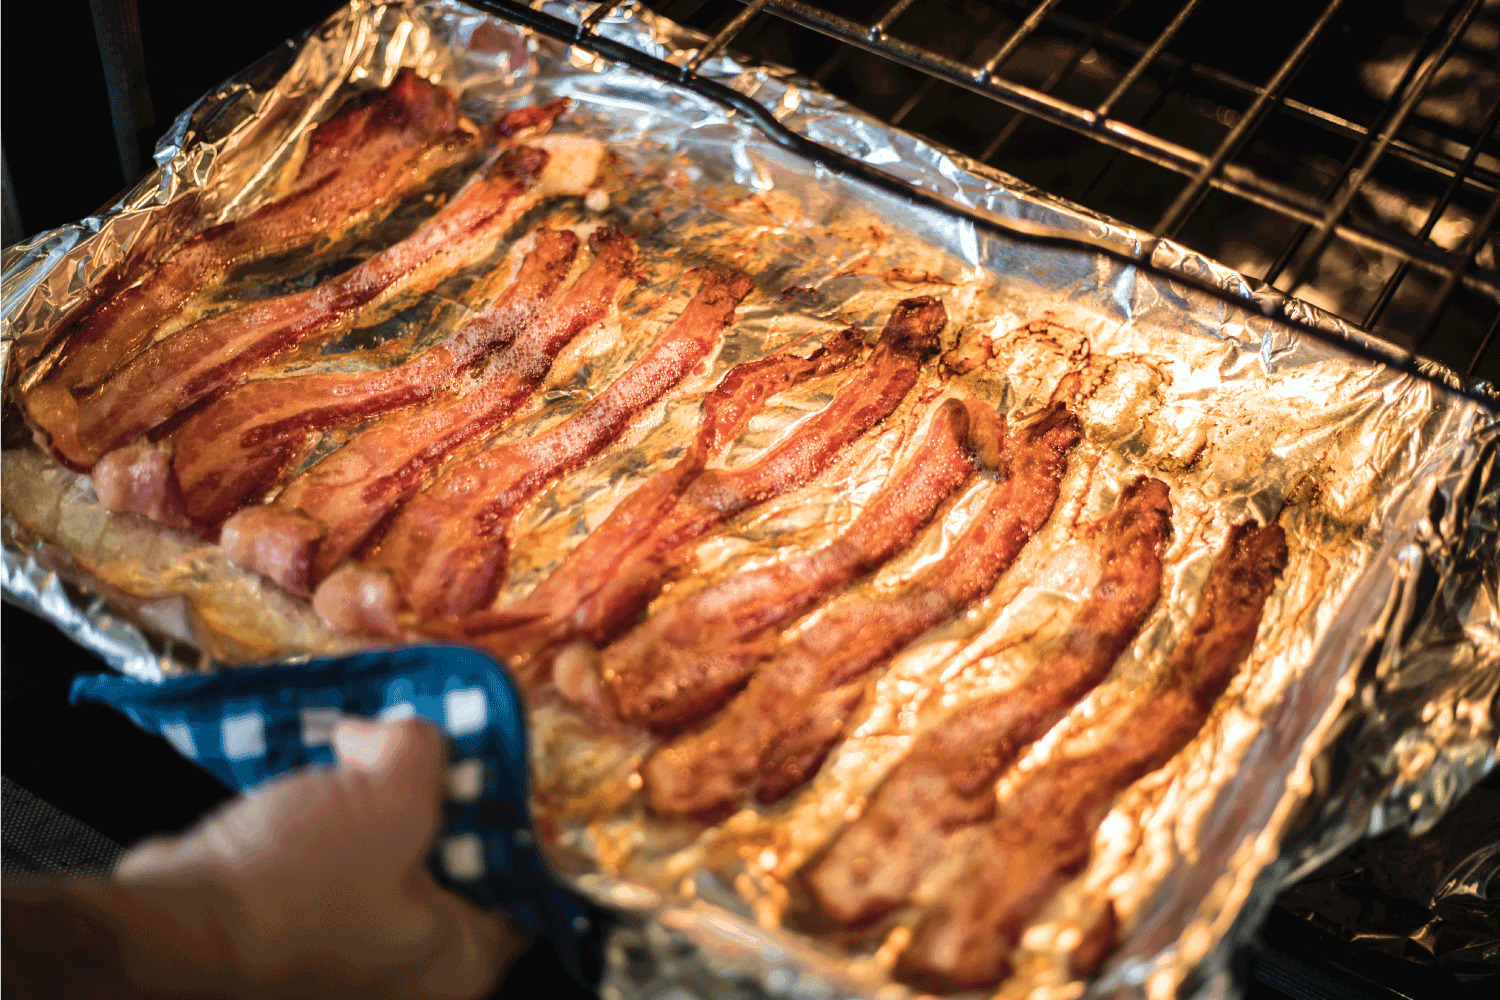 some Bacon cooking in an oven